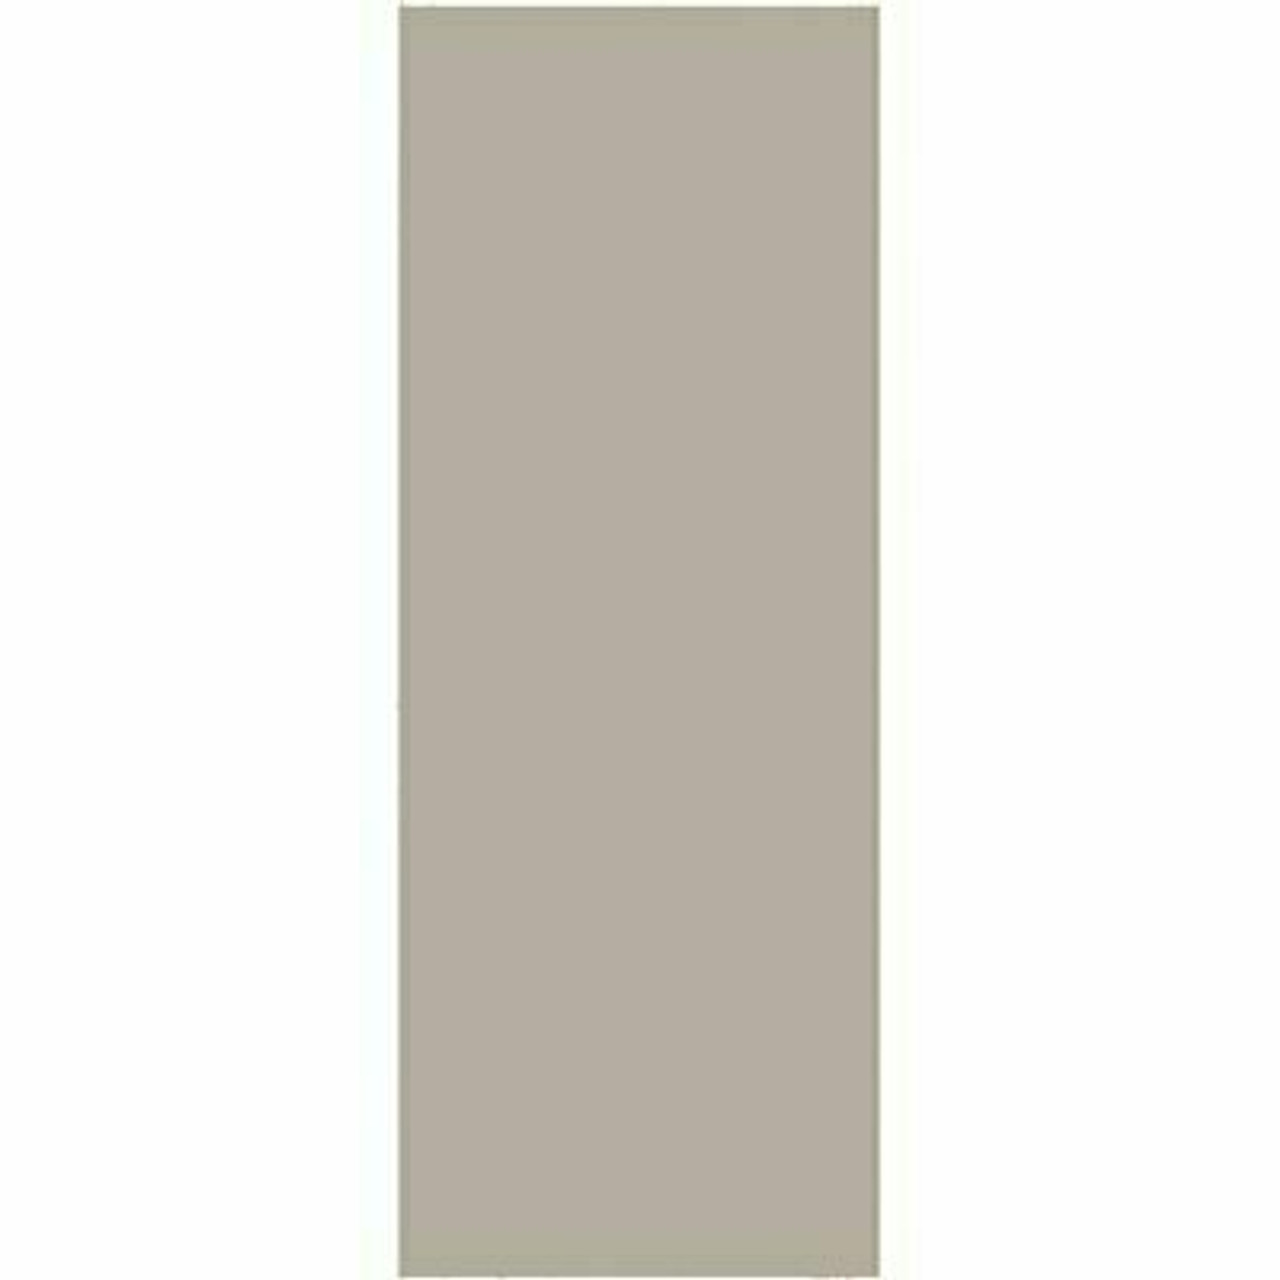 Hampton Bay 0.25X30X12 In. Matching Wall Cabinet End Panel In Dove Gray (2-Pack)